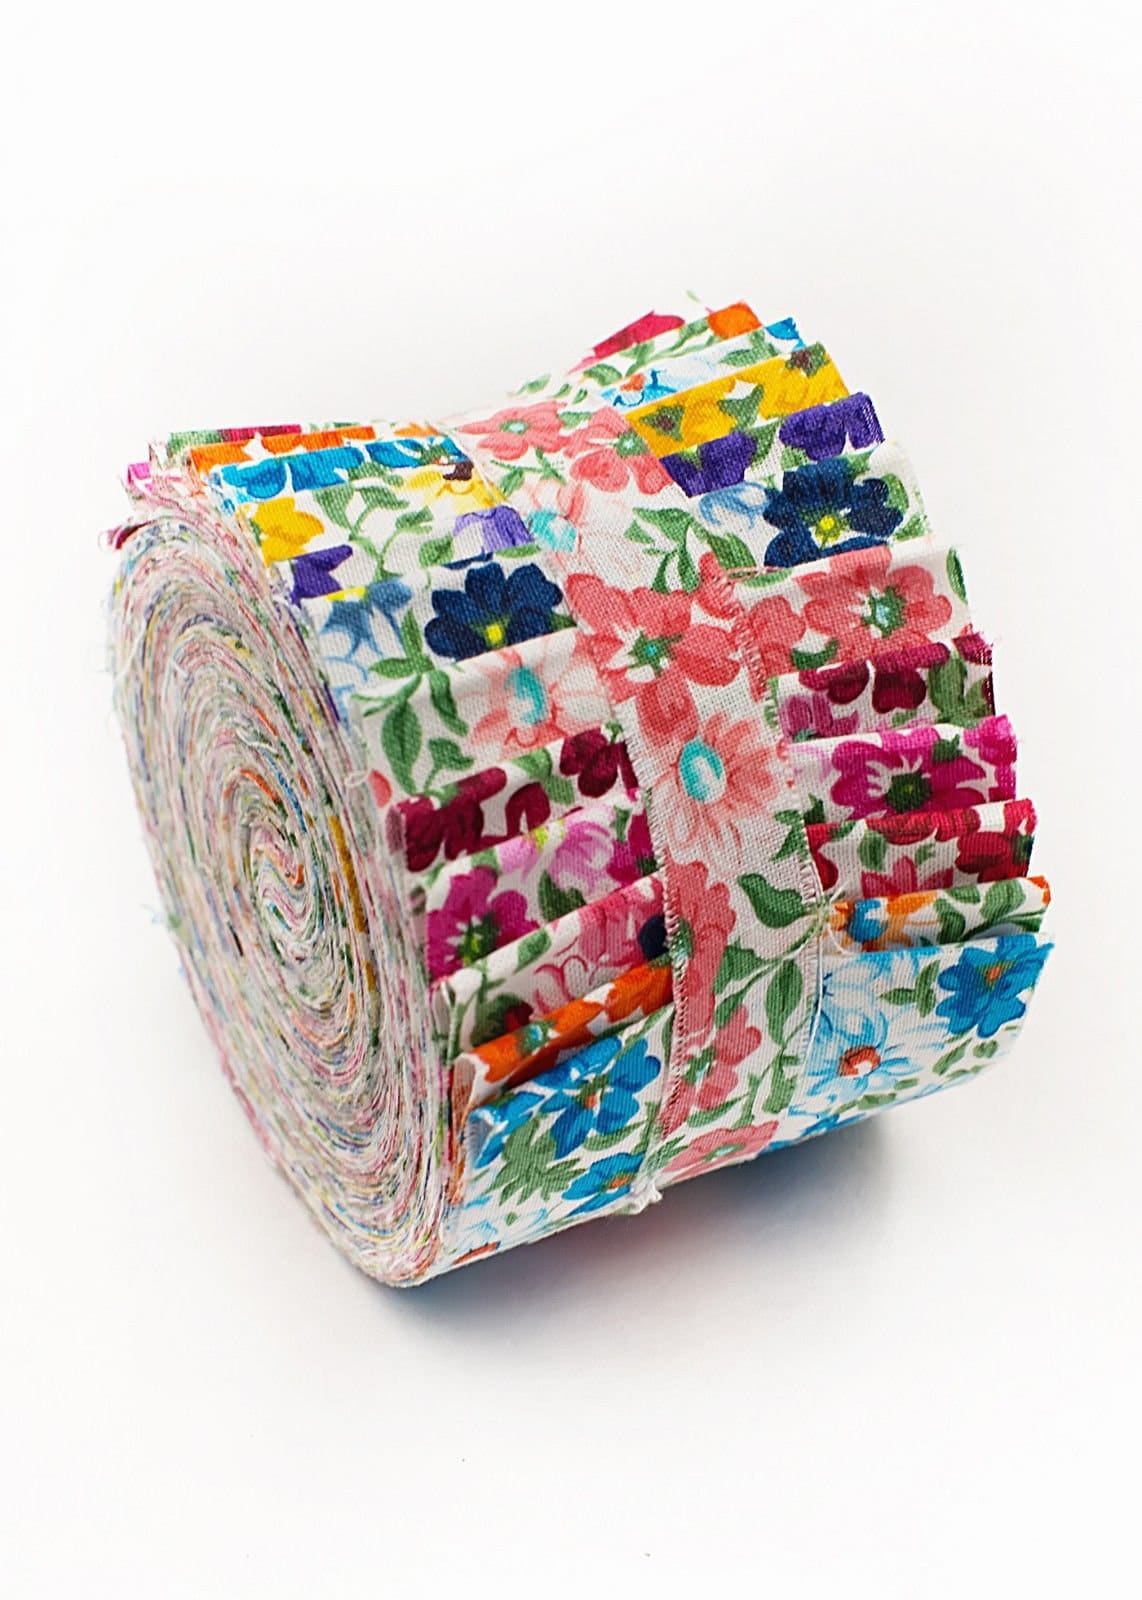 LIGHT Colorful Vintage Bouquet 2.5″ Jelly Roll fabric quilting